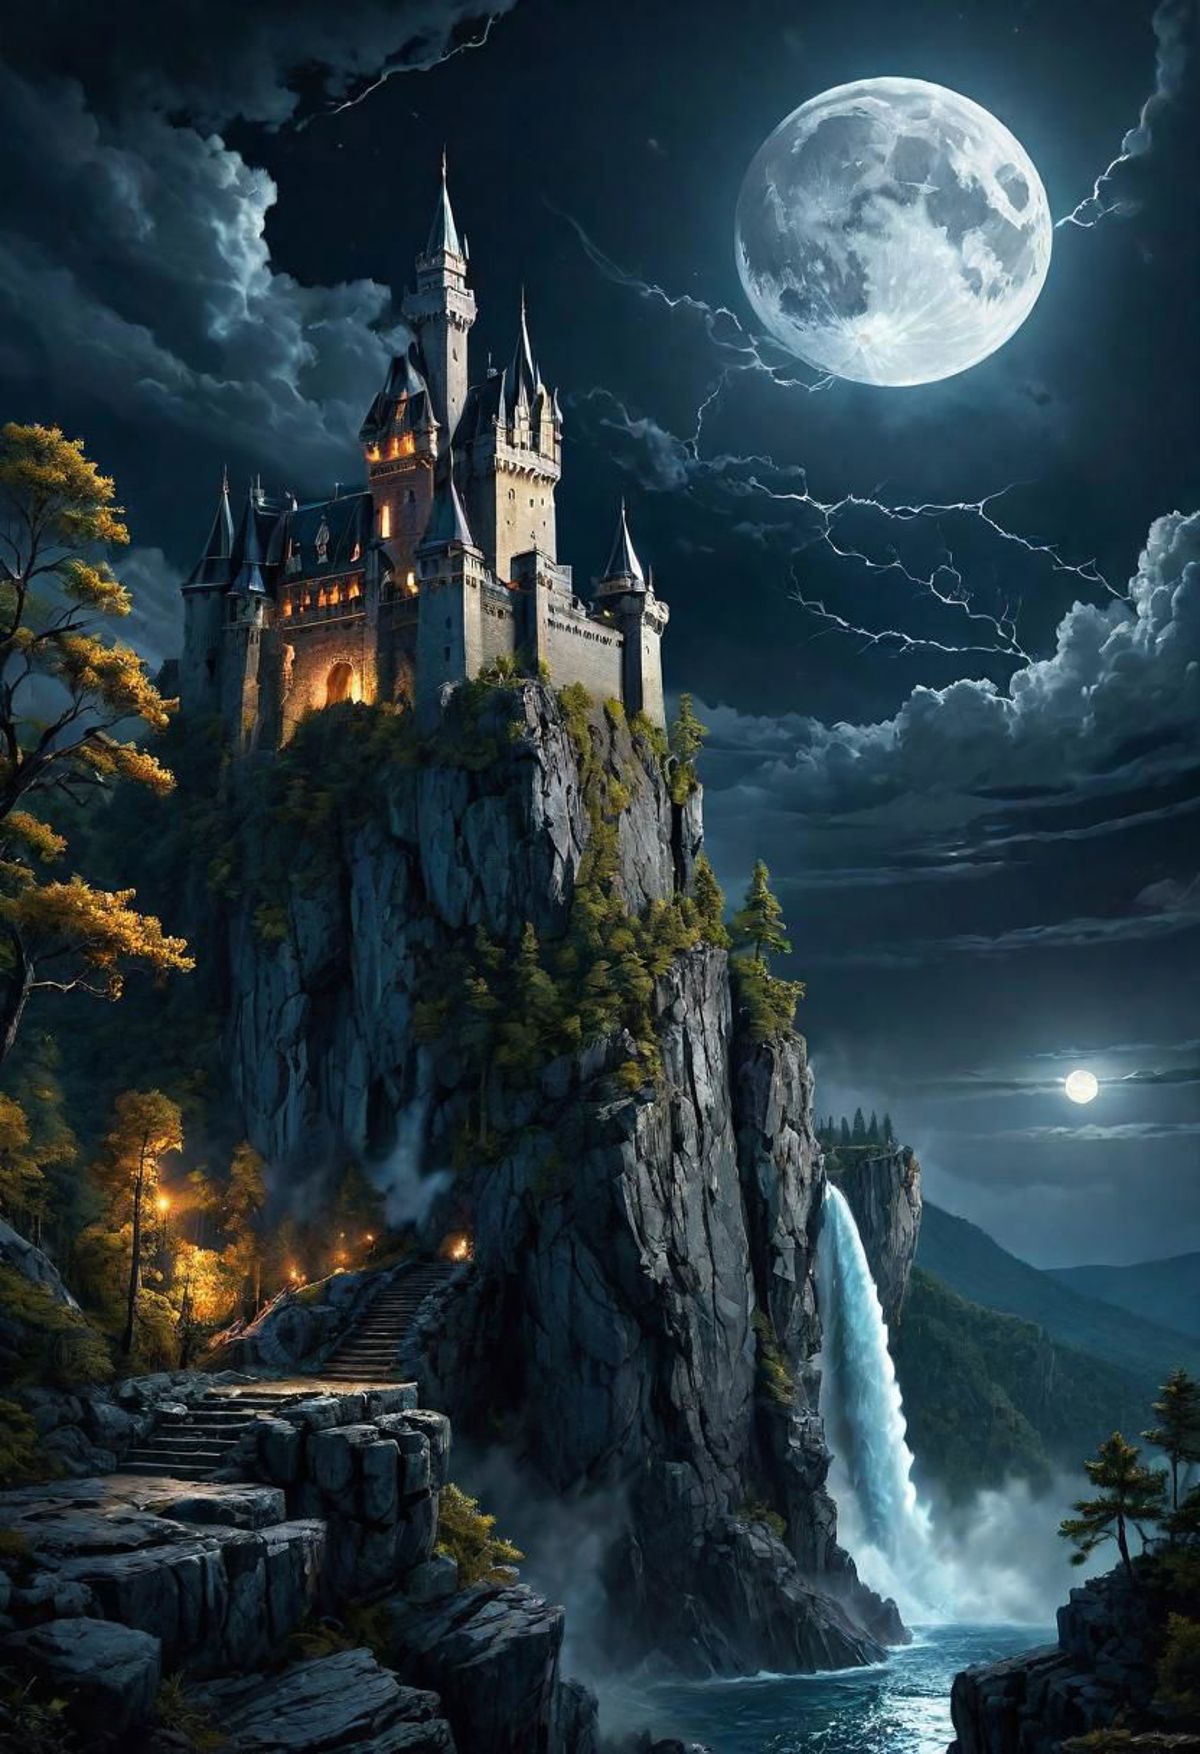 A castle at the top of a mountain with a moonlit sky in the background.